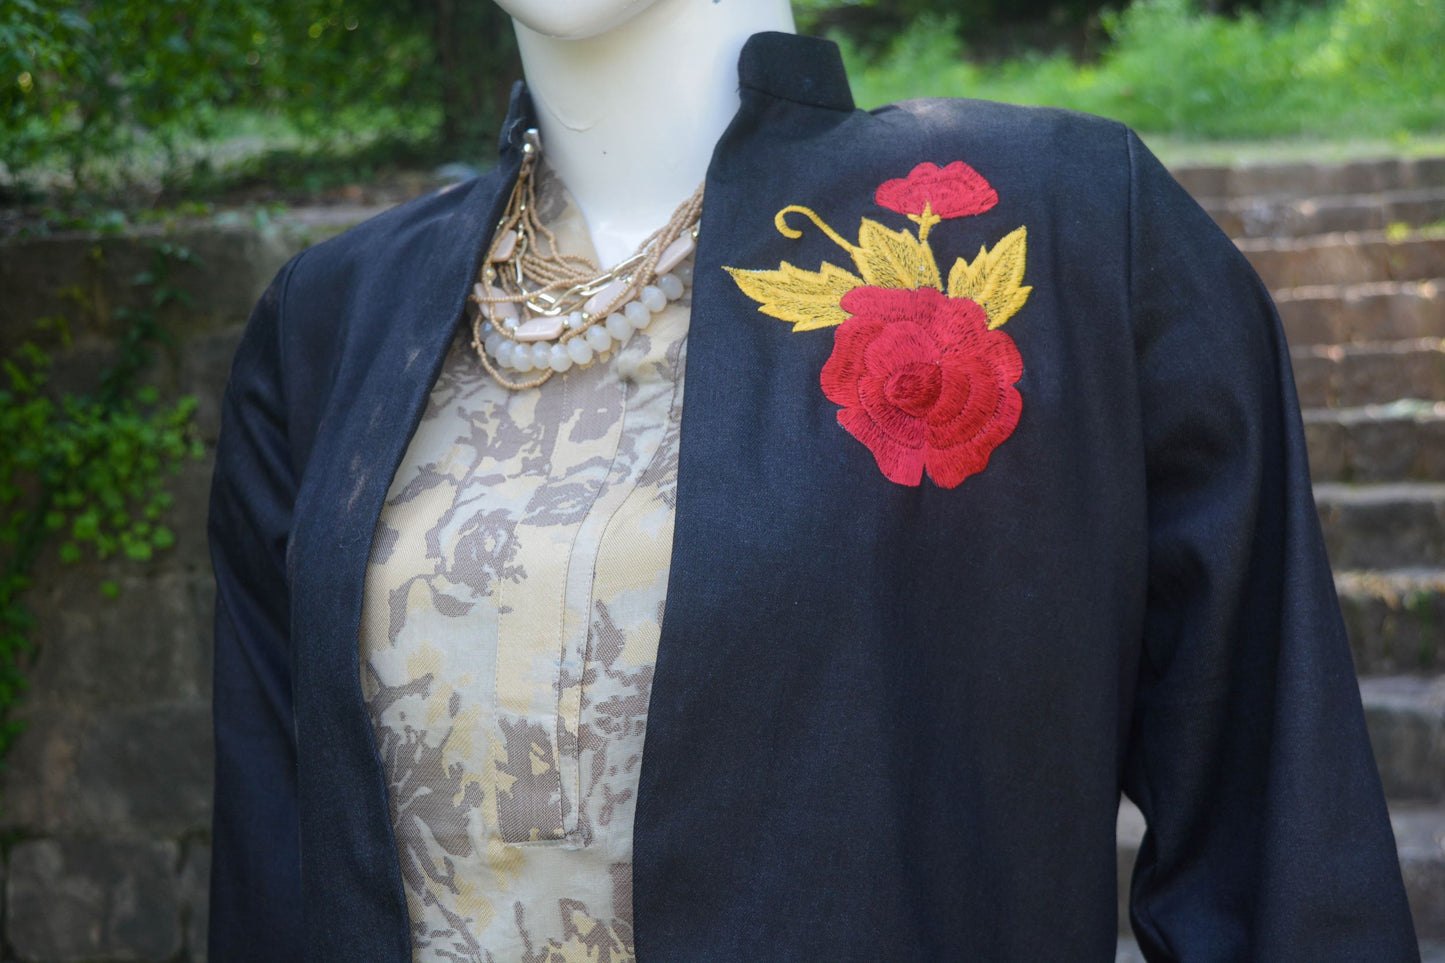 Black blazer with embroidered motif